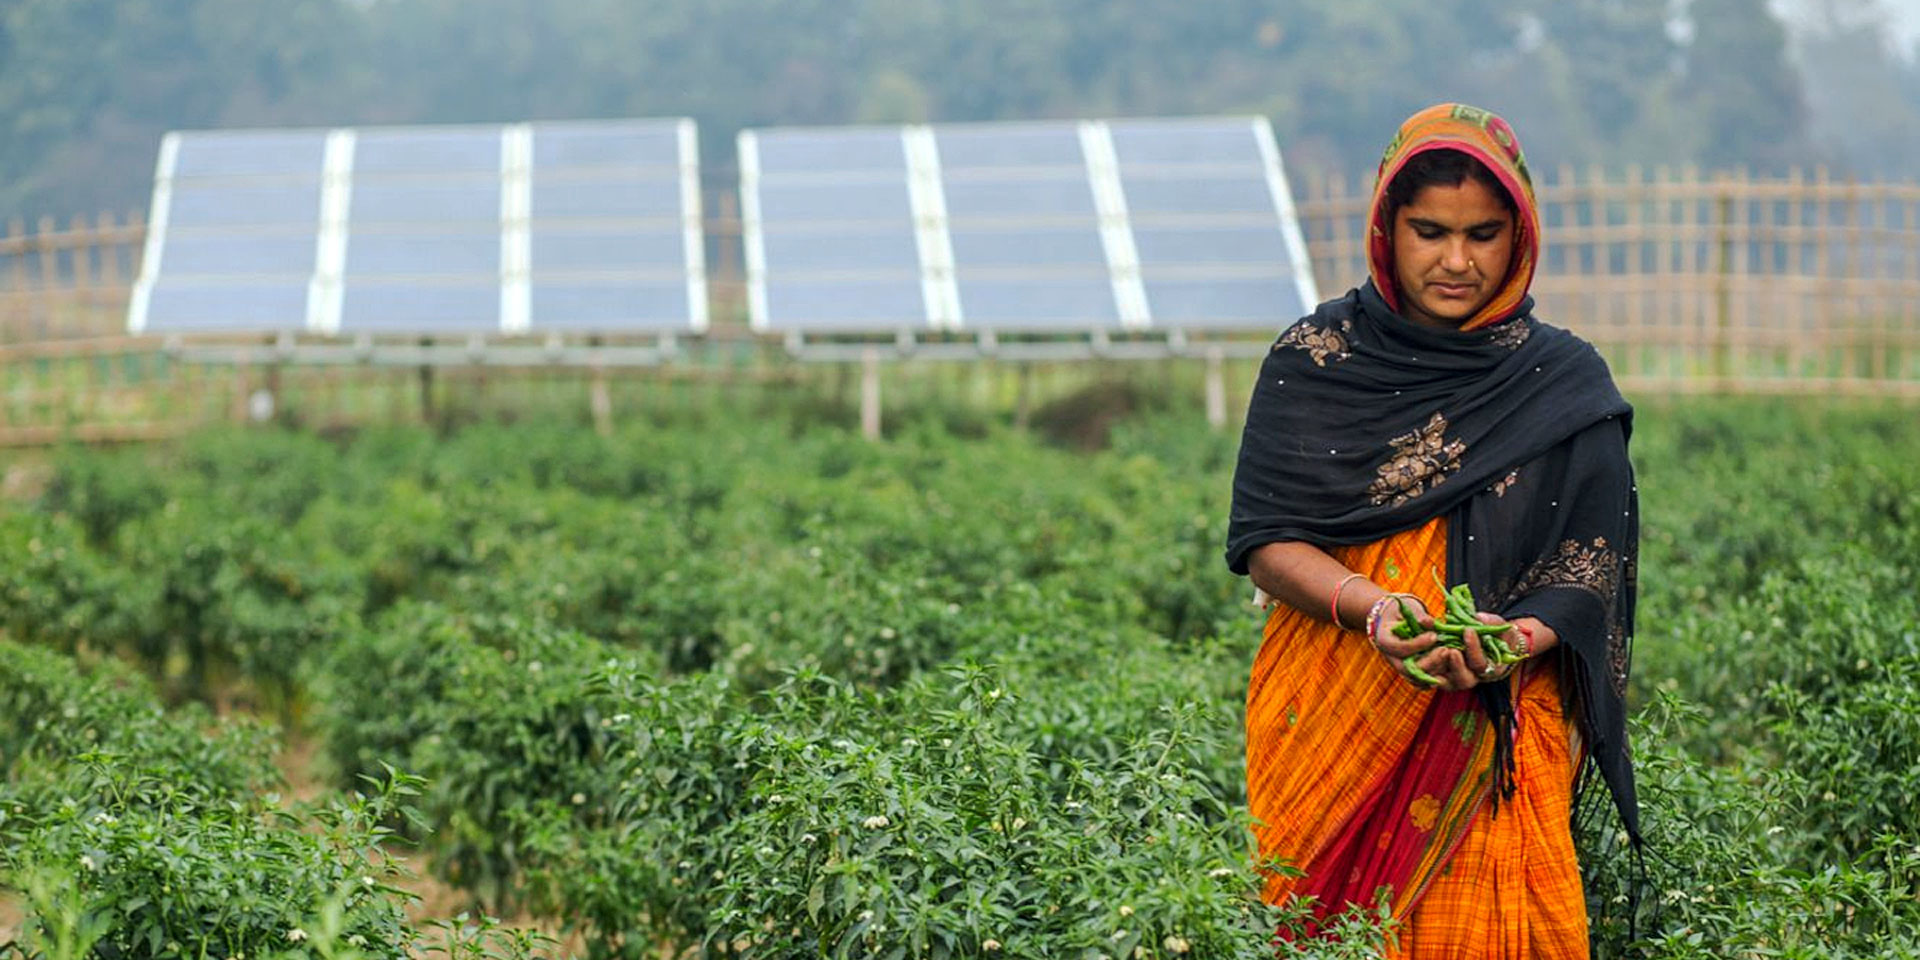 A woman in an orange sari harvesting fresh, green vegetables in an otherwise dry area. Solar panels can be seen in the background.